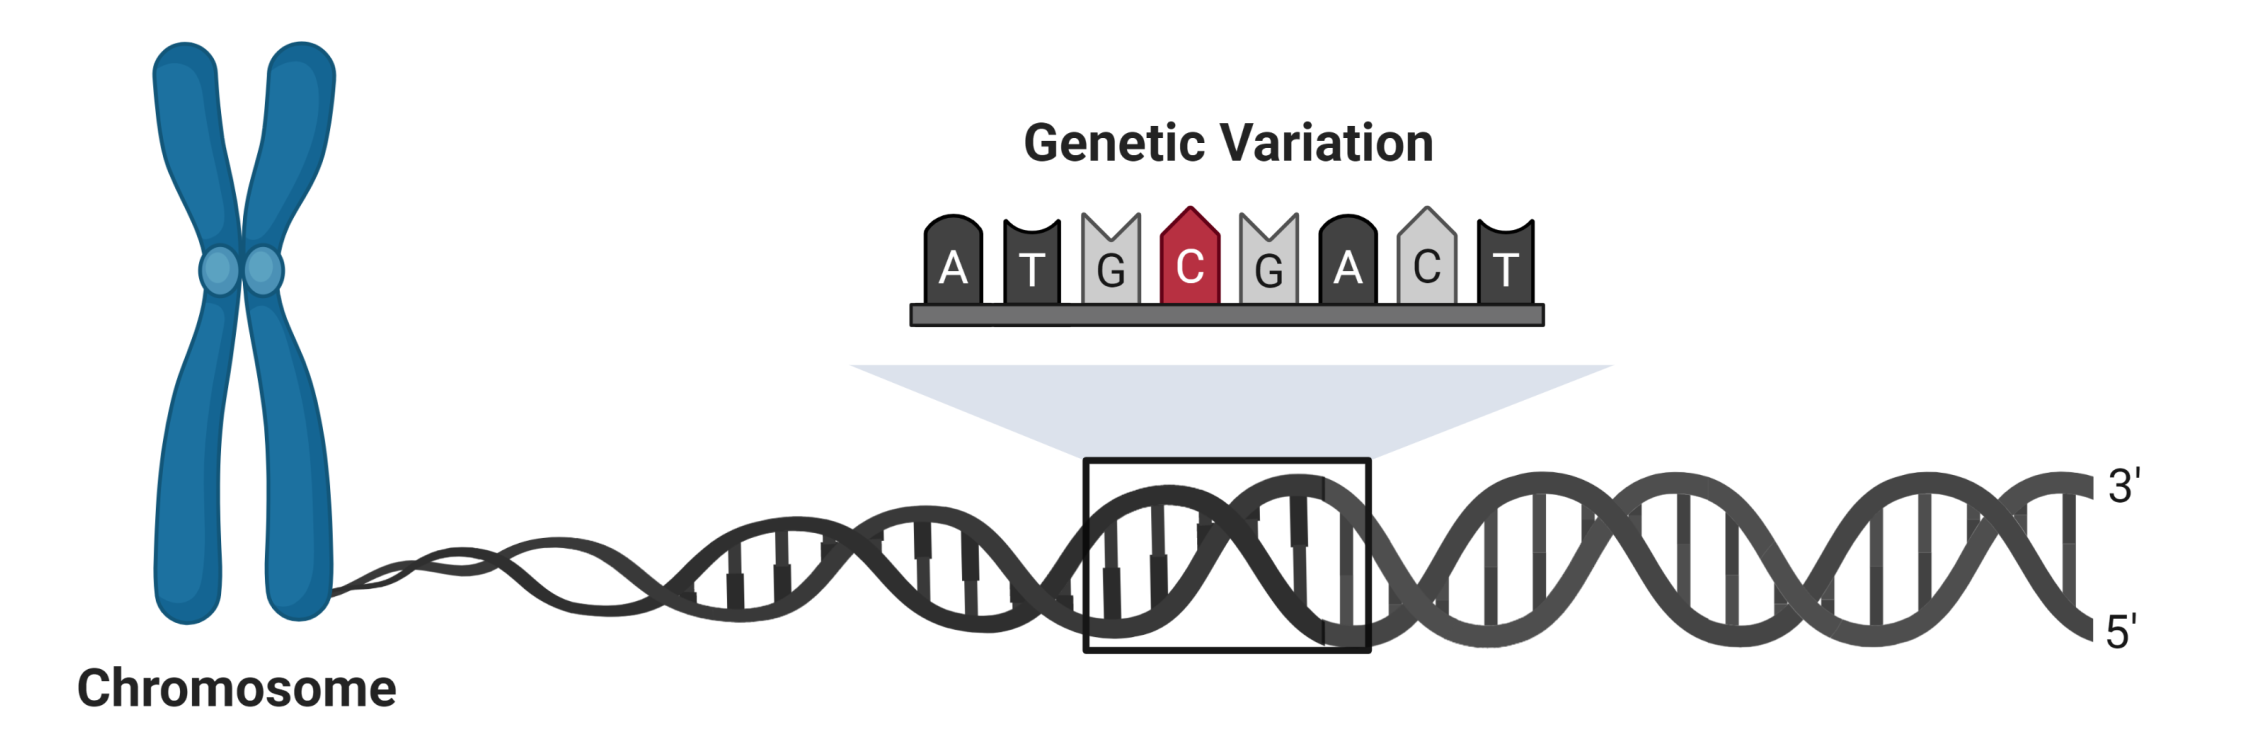 genetic_variation_overview